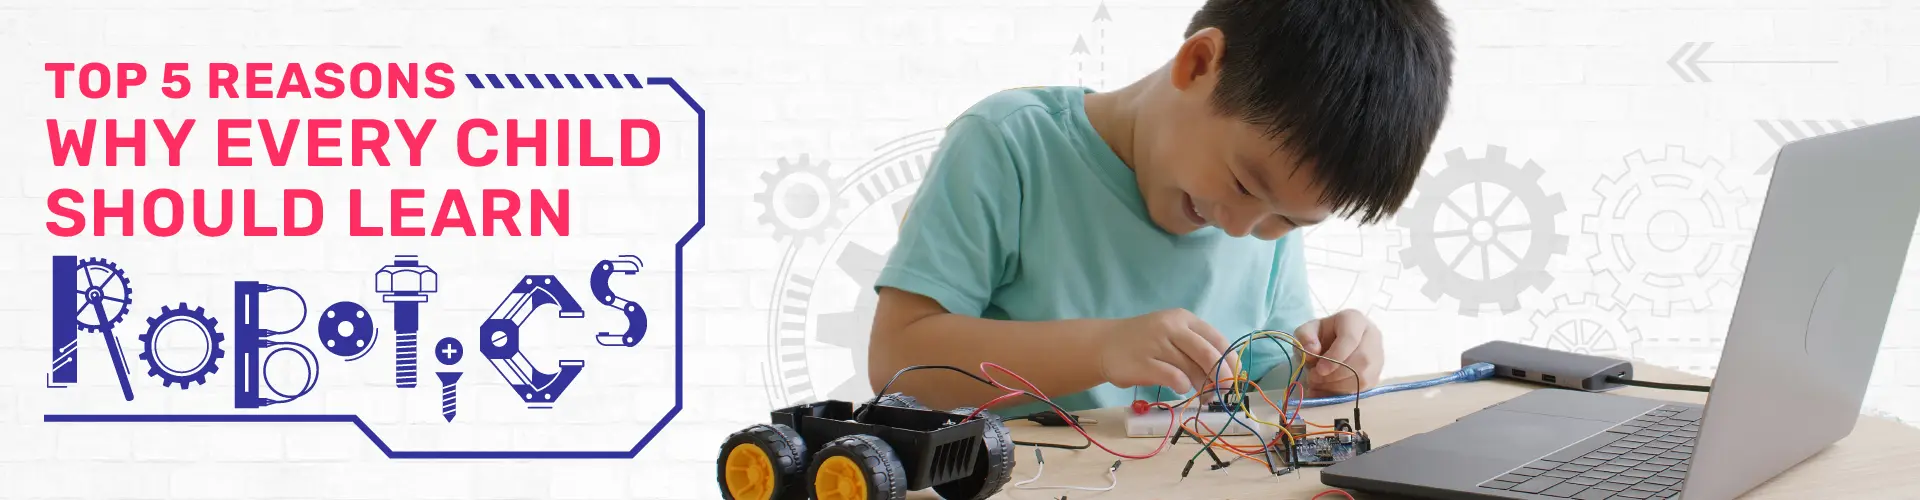 Top 5 Reasons Why Every Child Should Learn Robotics